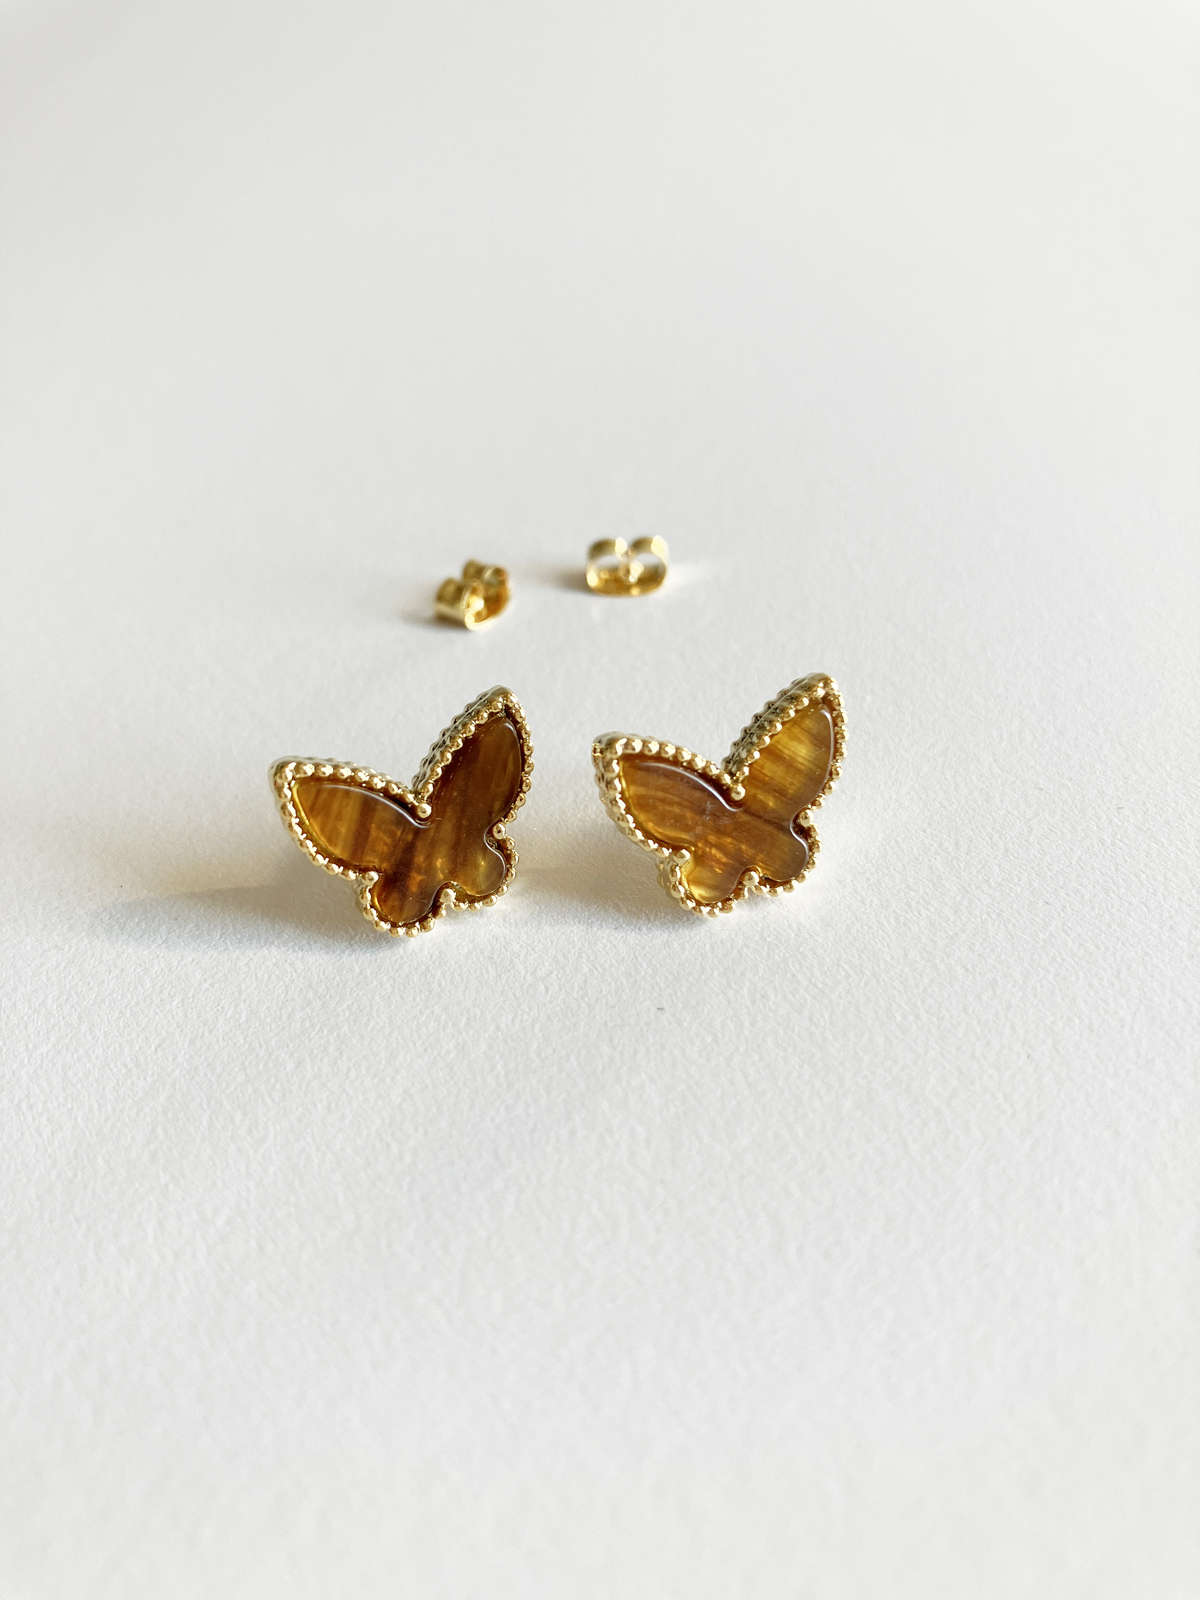 Primary image for Tiger Eye Butterfly Earrings in Gold